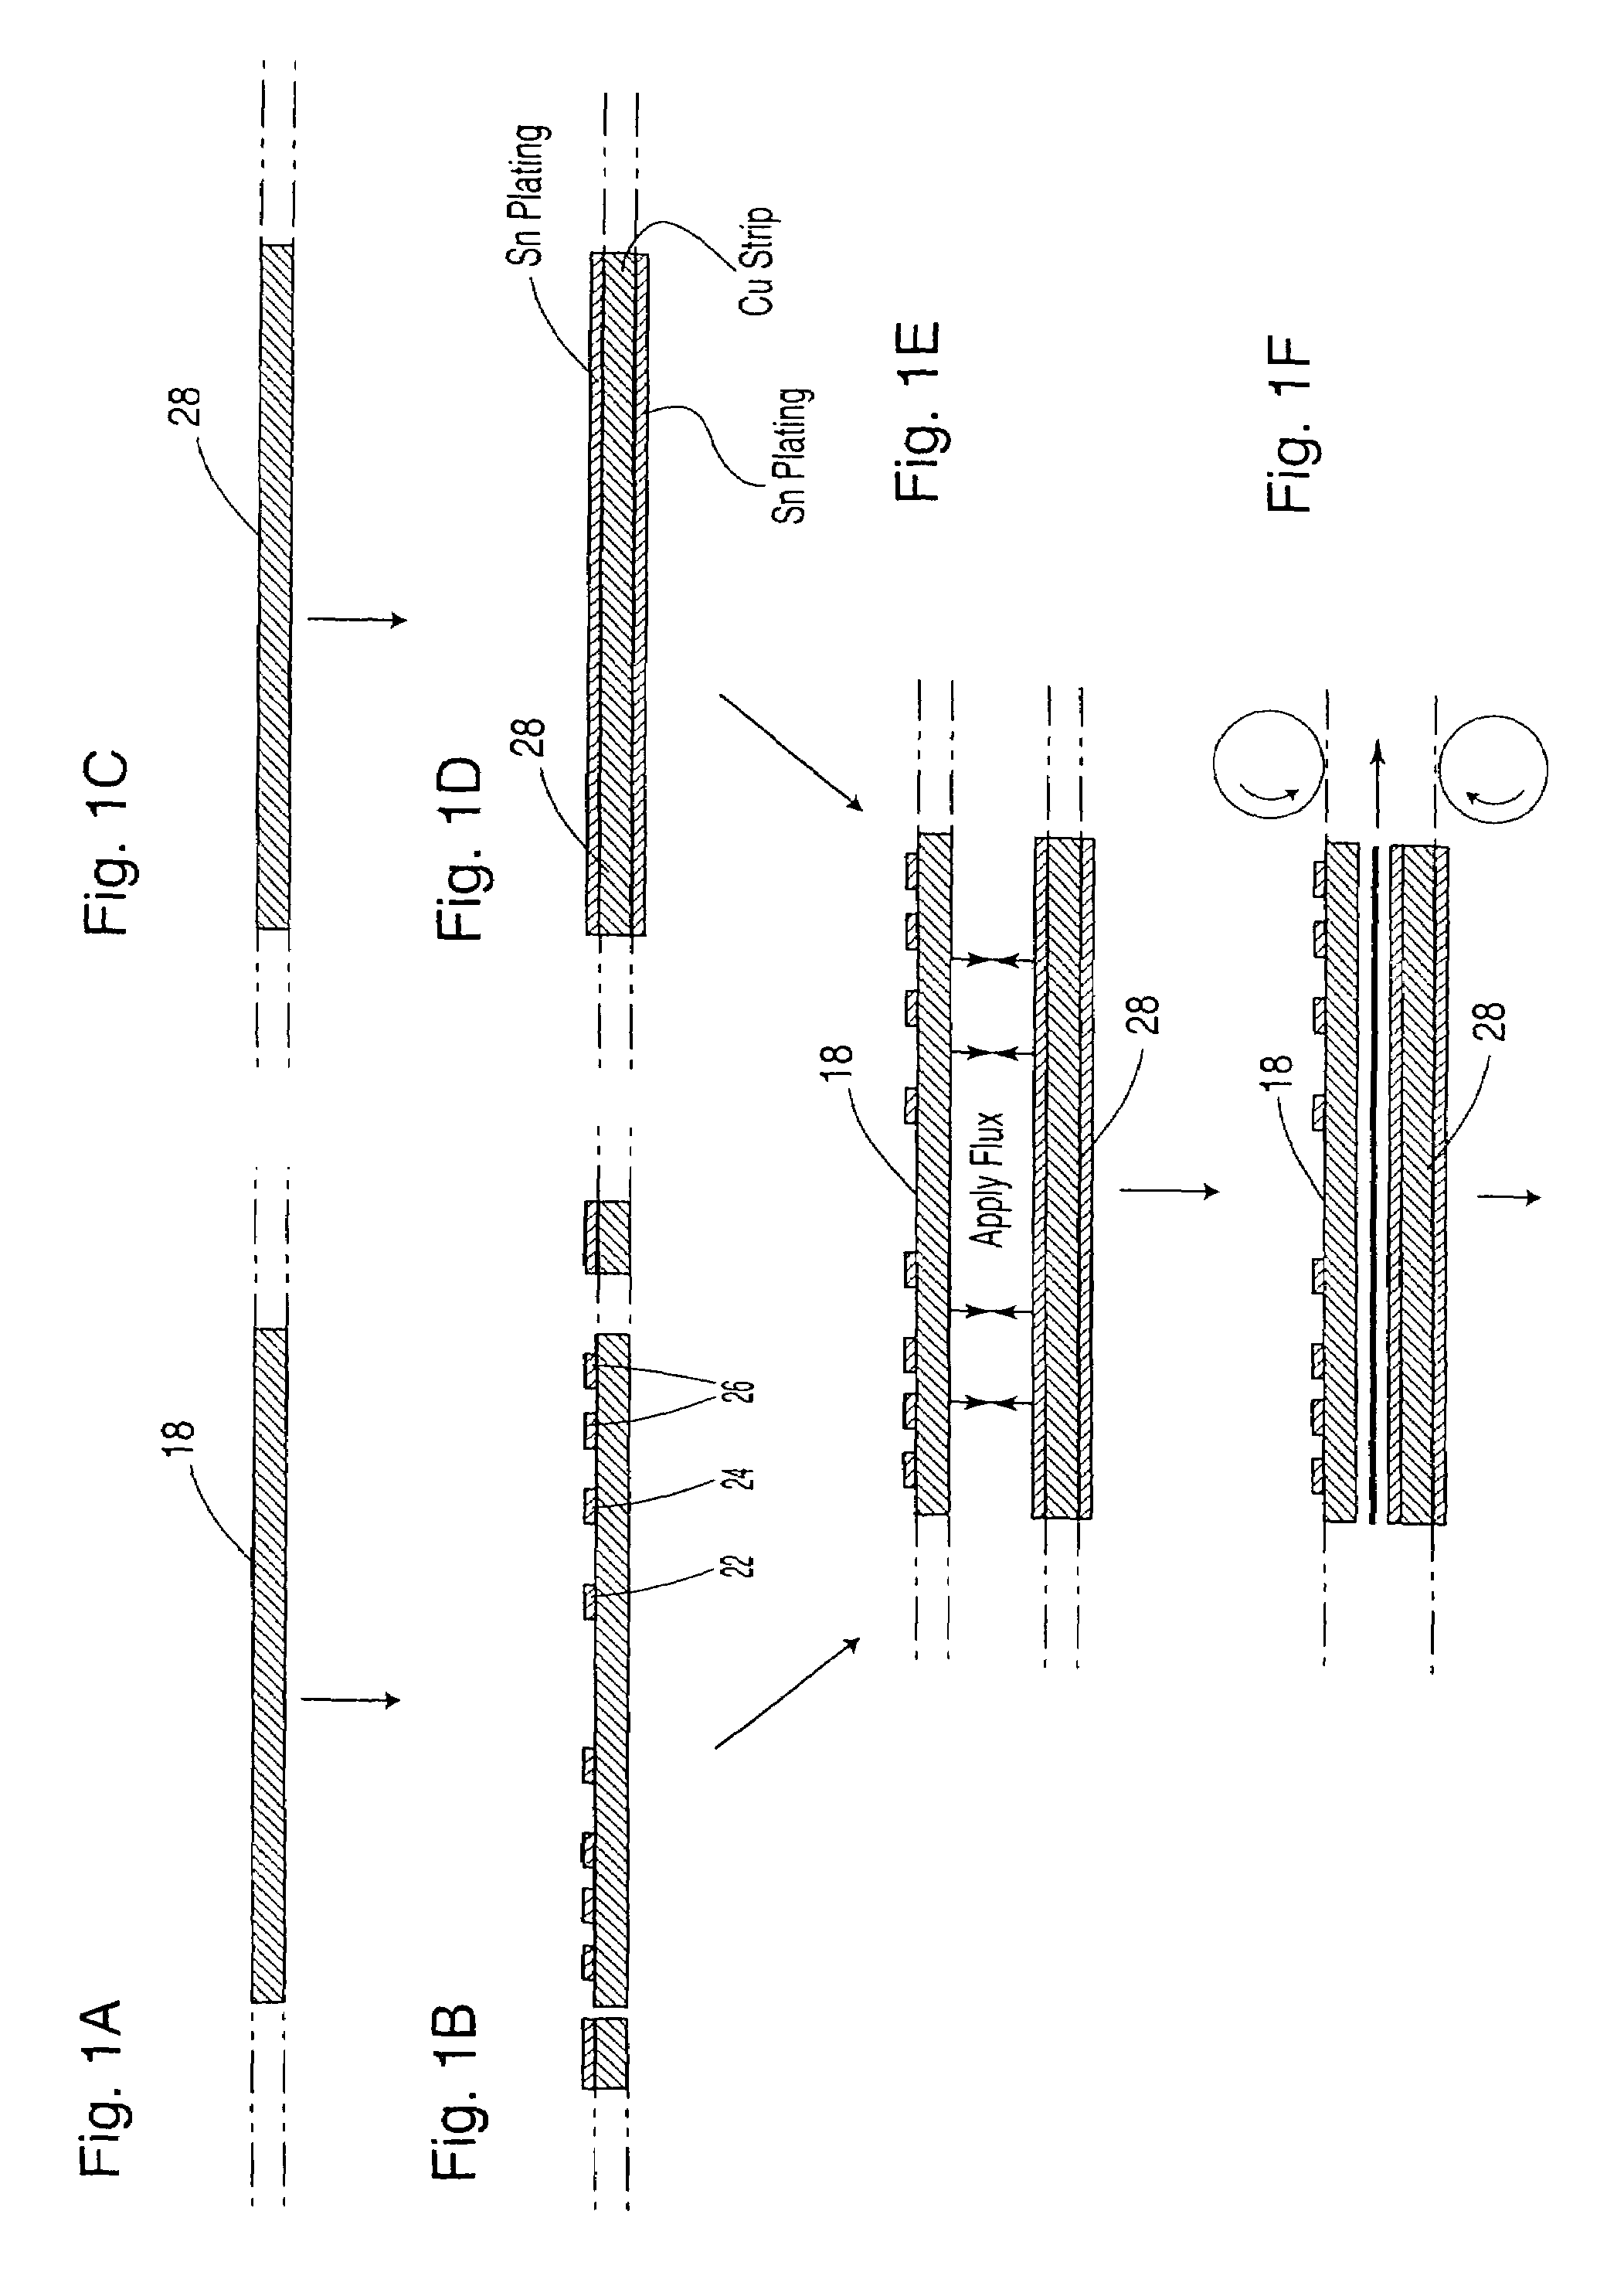 Process for fabricating a leadless plastic chip carrier